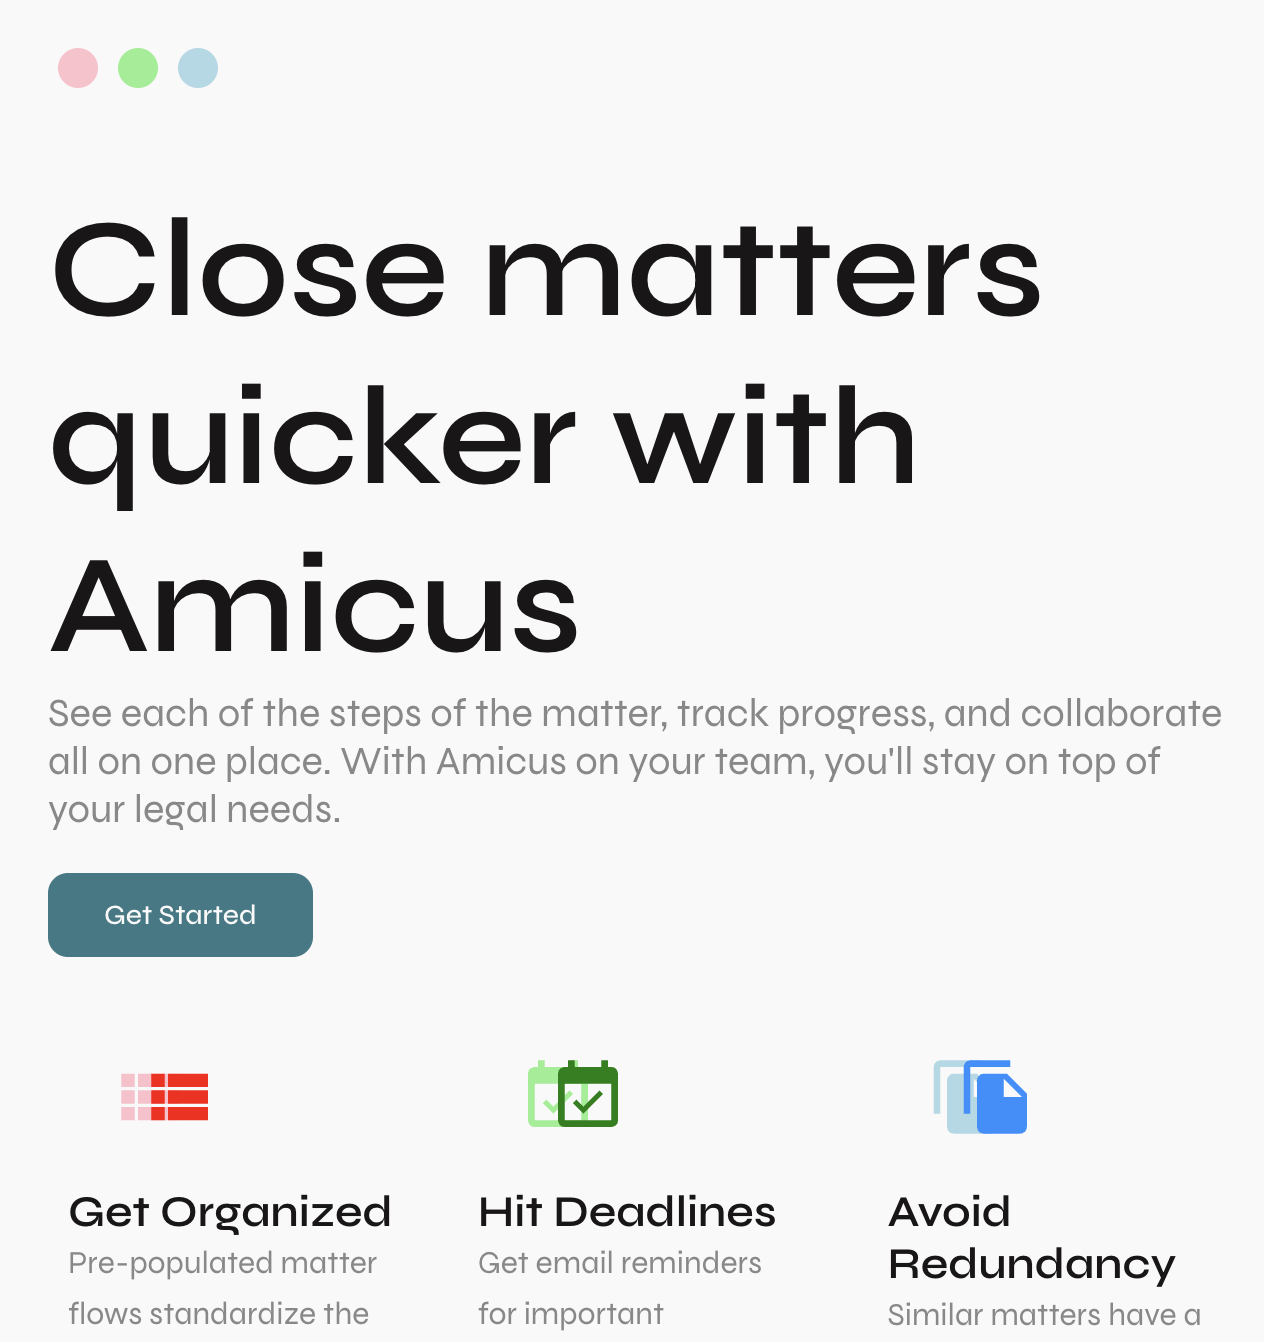 Amicus Homepage